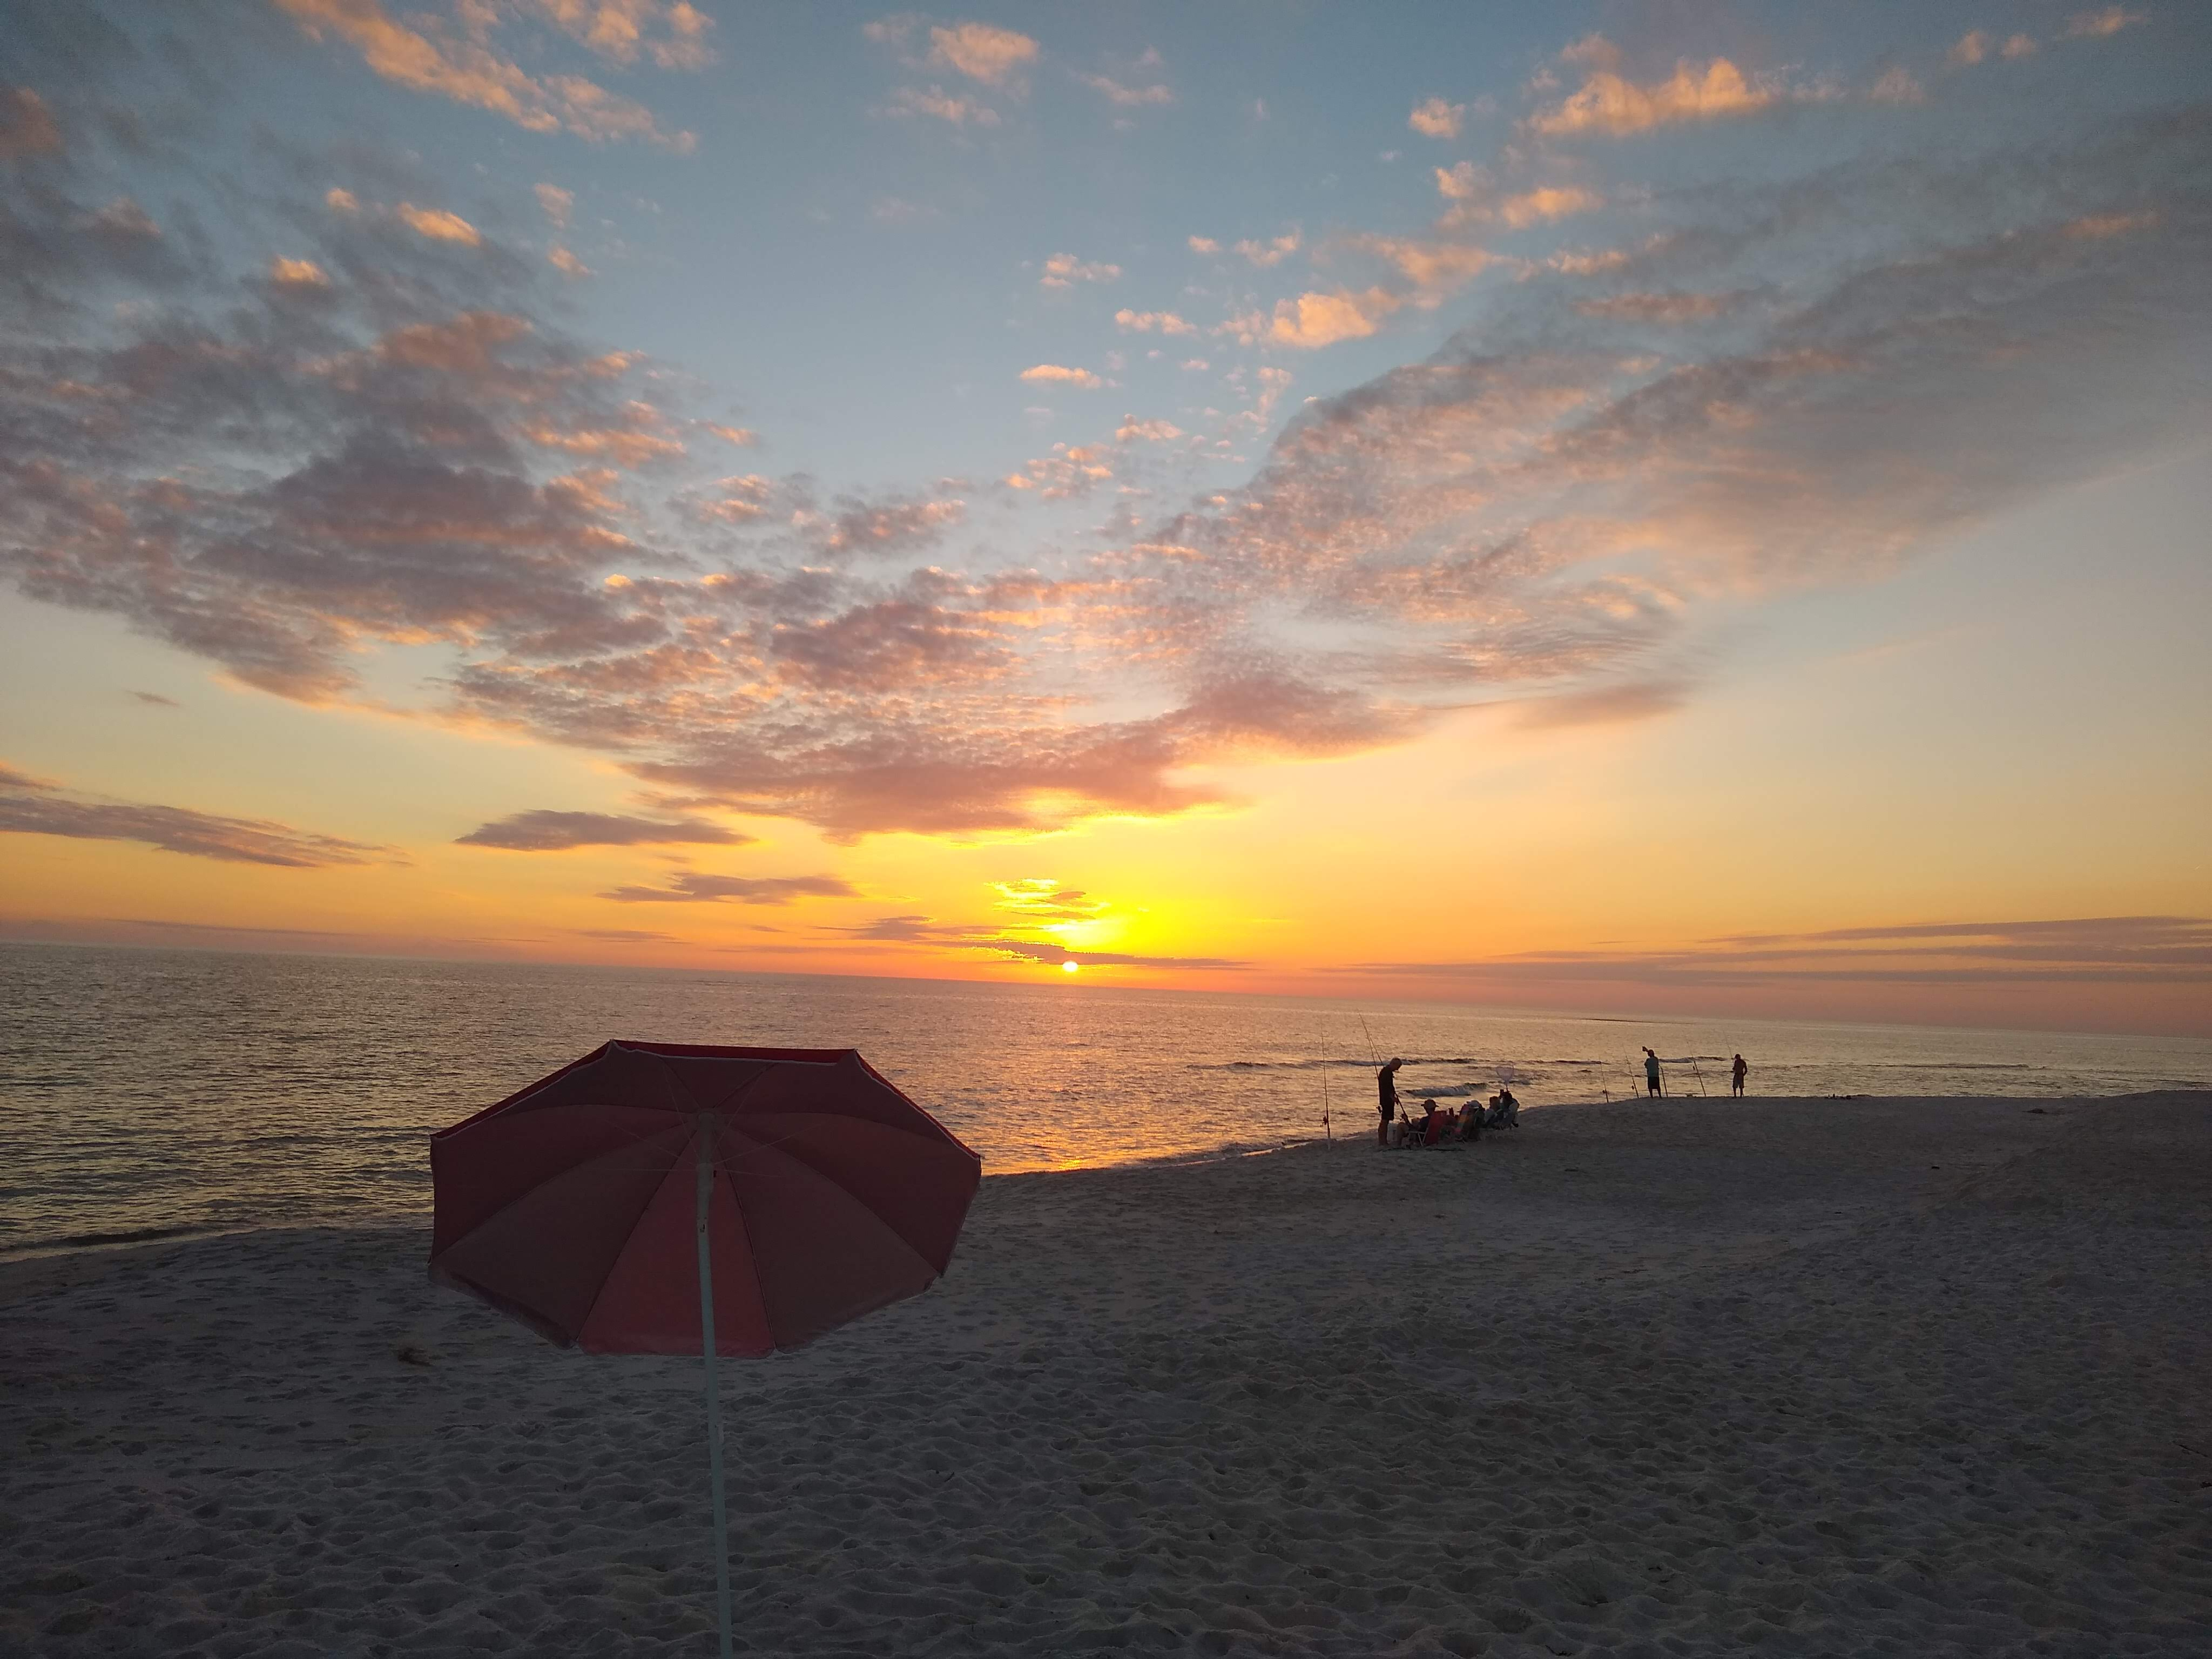 Sunset over the Gulf of Mexico from Panama City Beach, FL, at Bay County Public Beach Access 96.